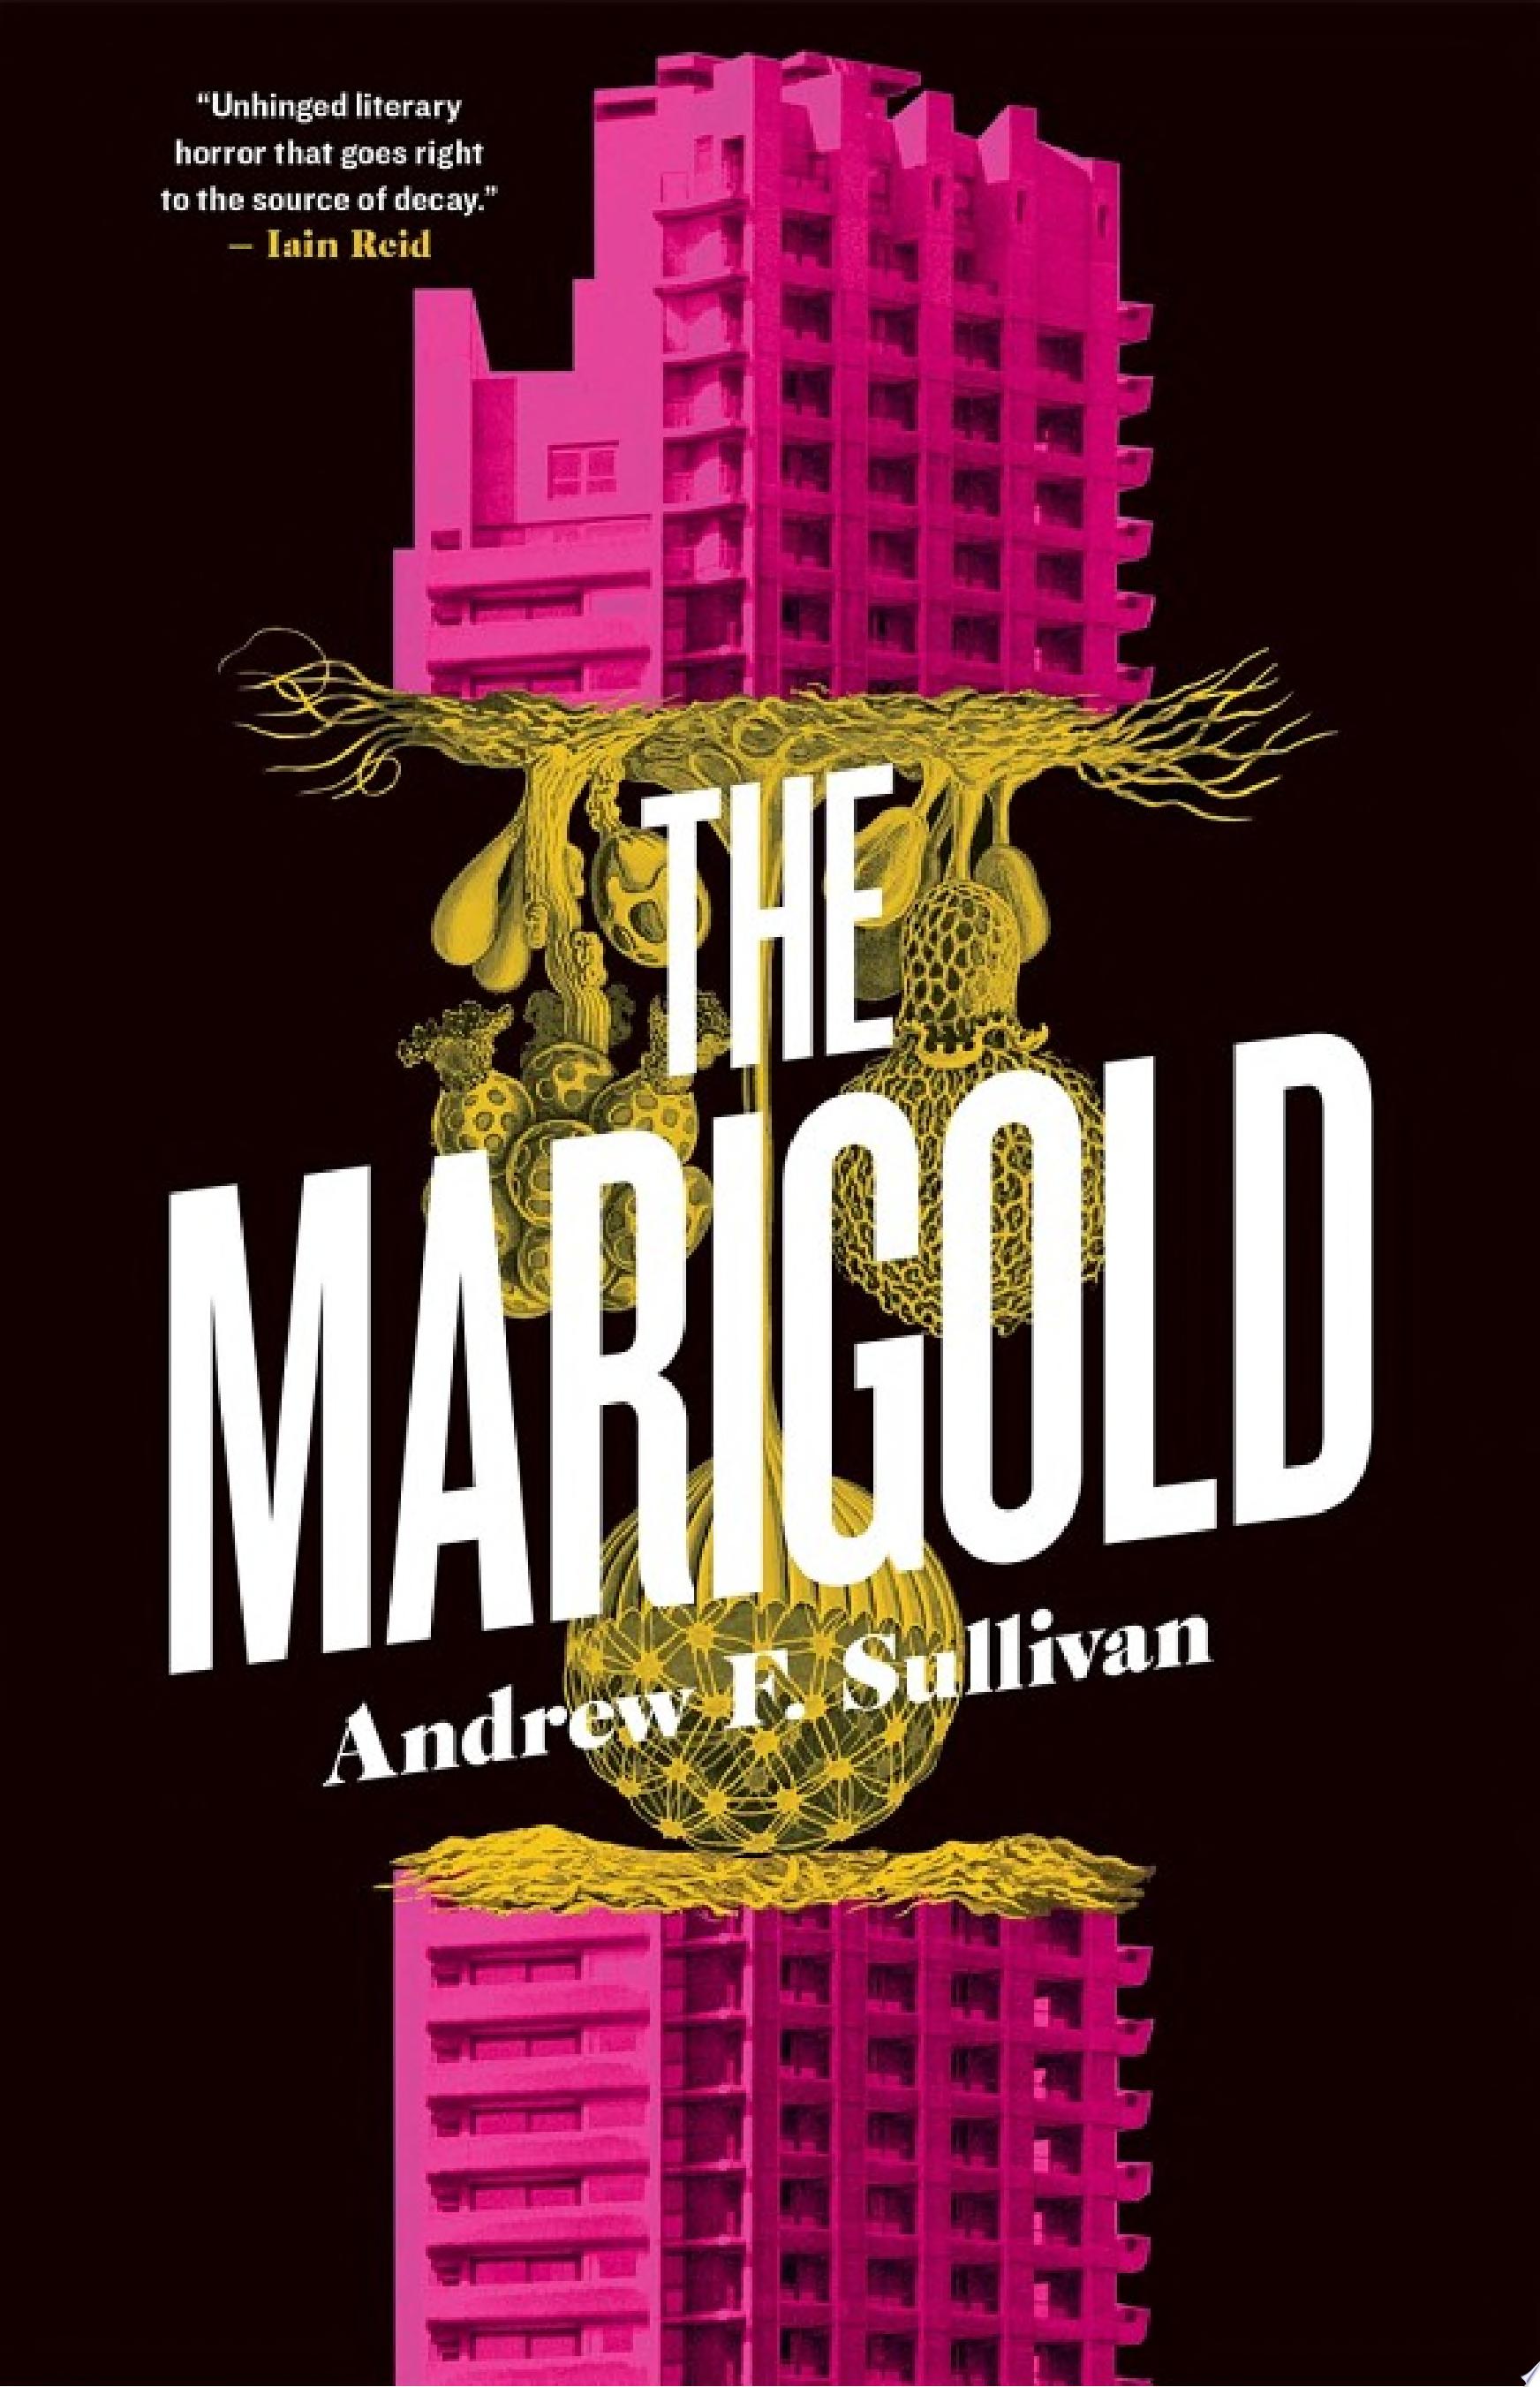 Image for "The Marigold"